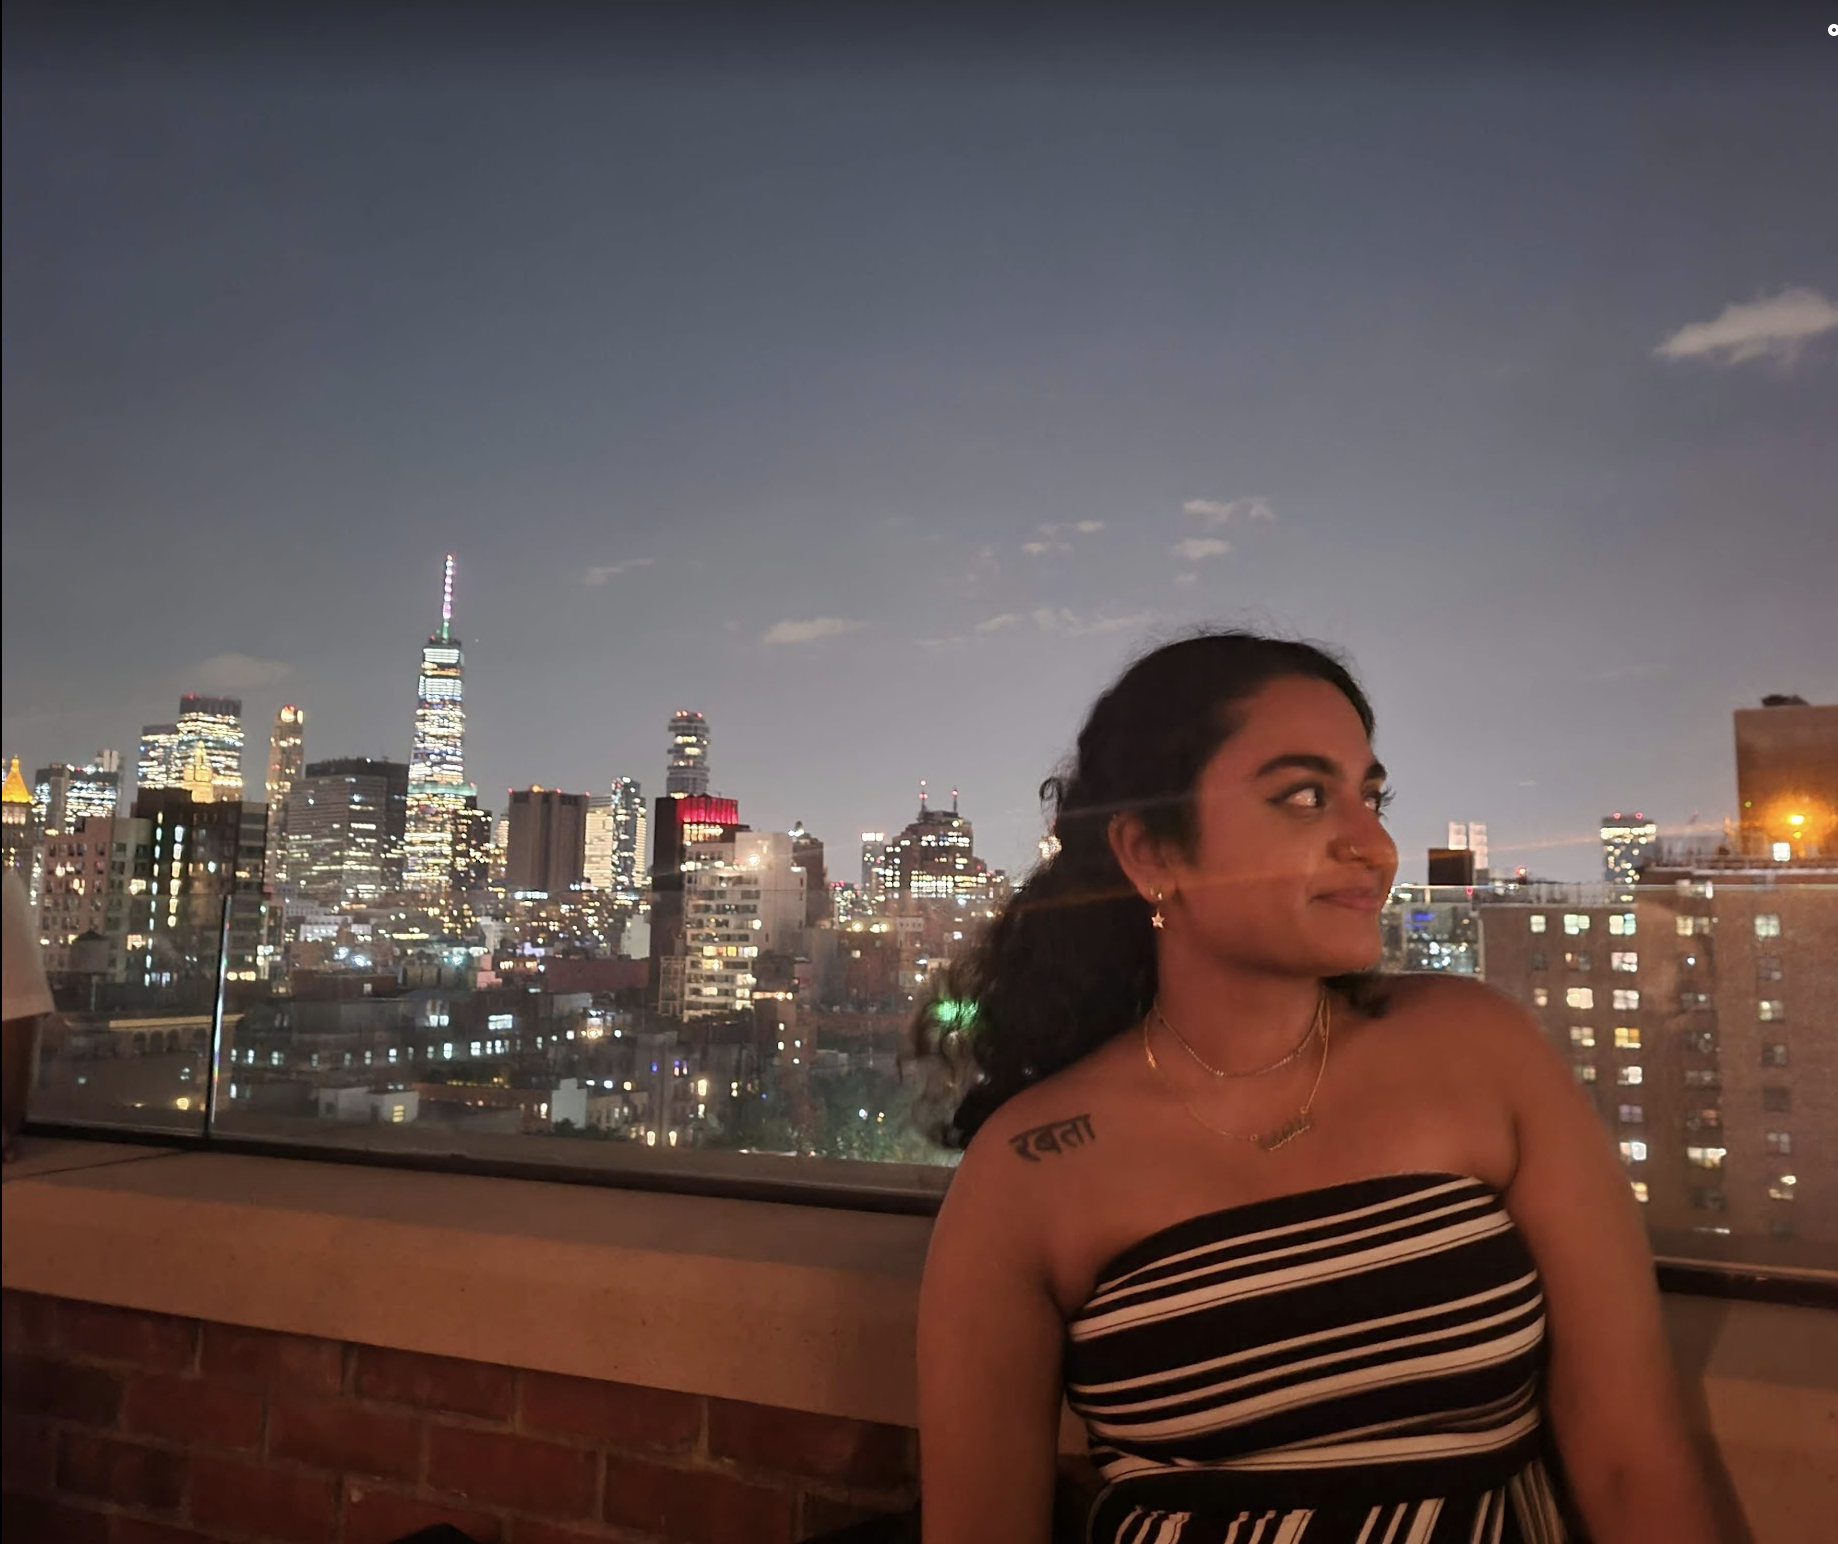 Student standing on a New York City rooftop with the skyline light up behind her at night.